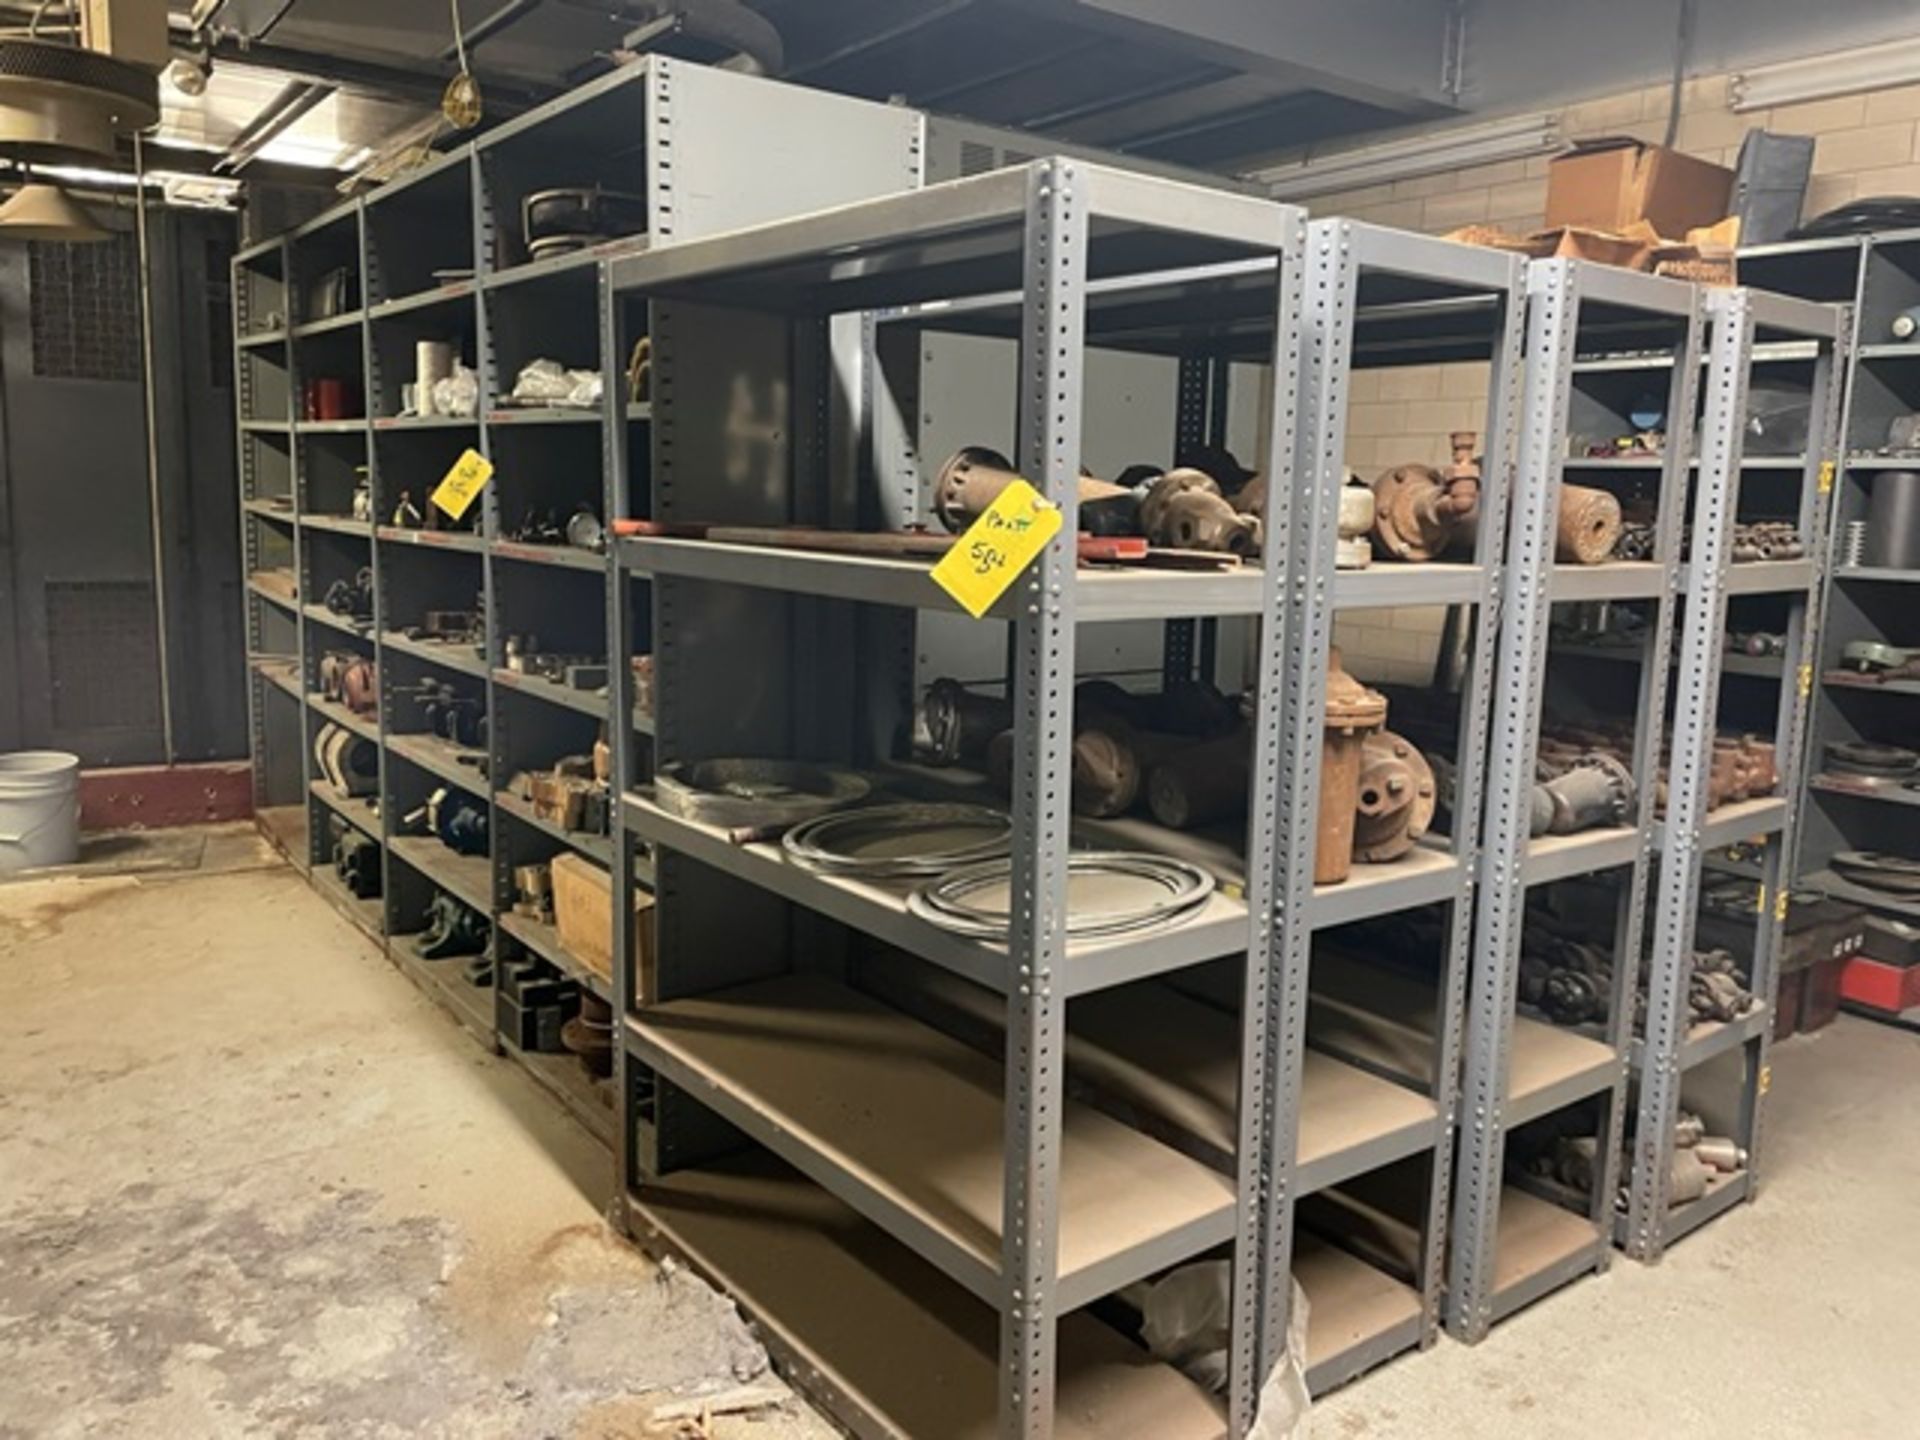 Plant Support, (5) Shelf Units w/Contents, Parts & Components, Rigging & Loading Fee: $1100 - Image 2 of 3